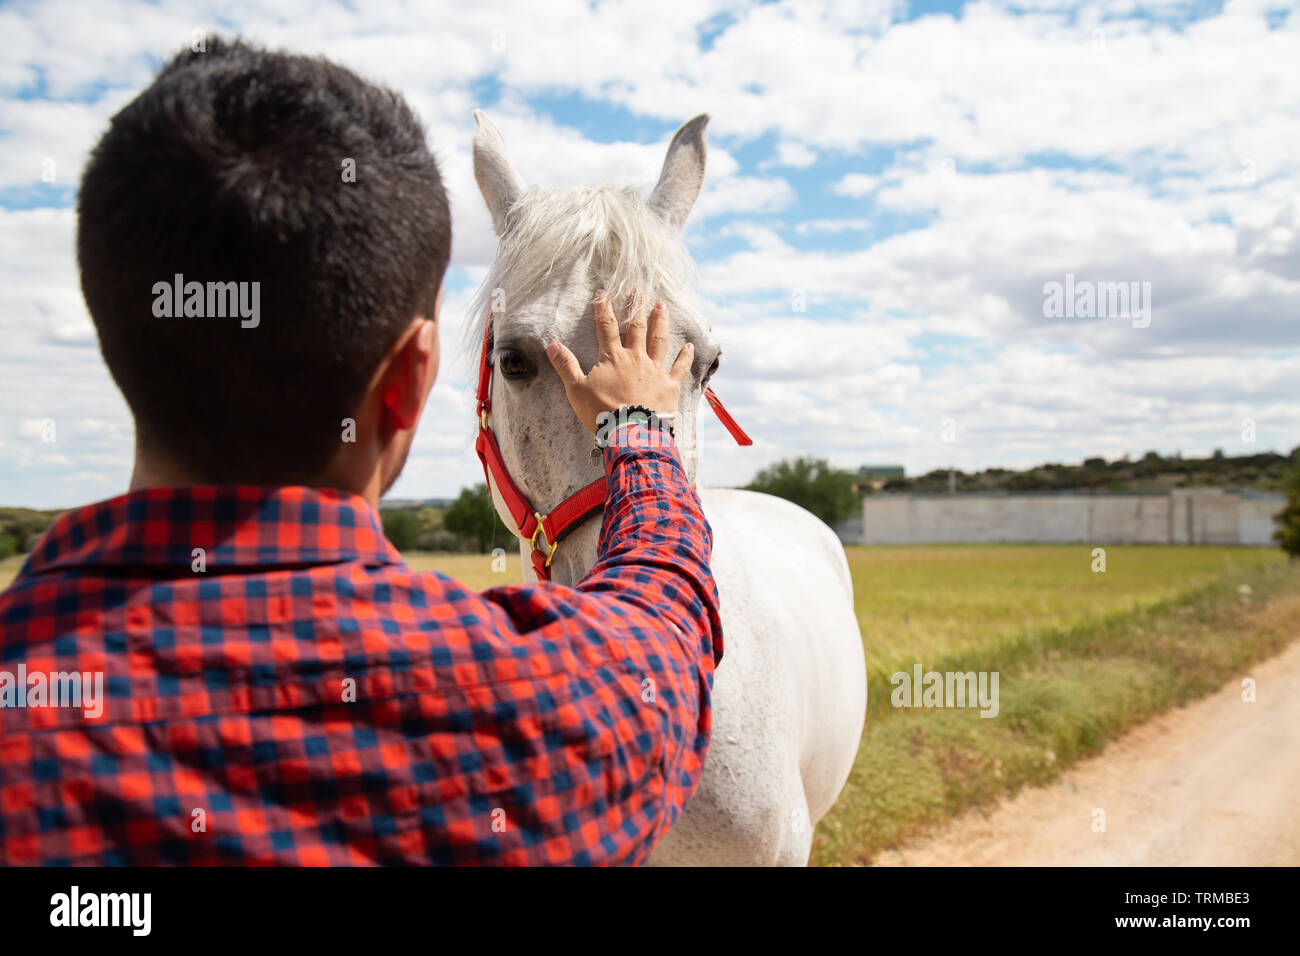 Back view of young male putting hand on forehead of white horse against cloudy sky in field Stock Photo